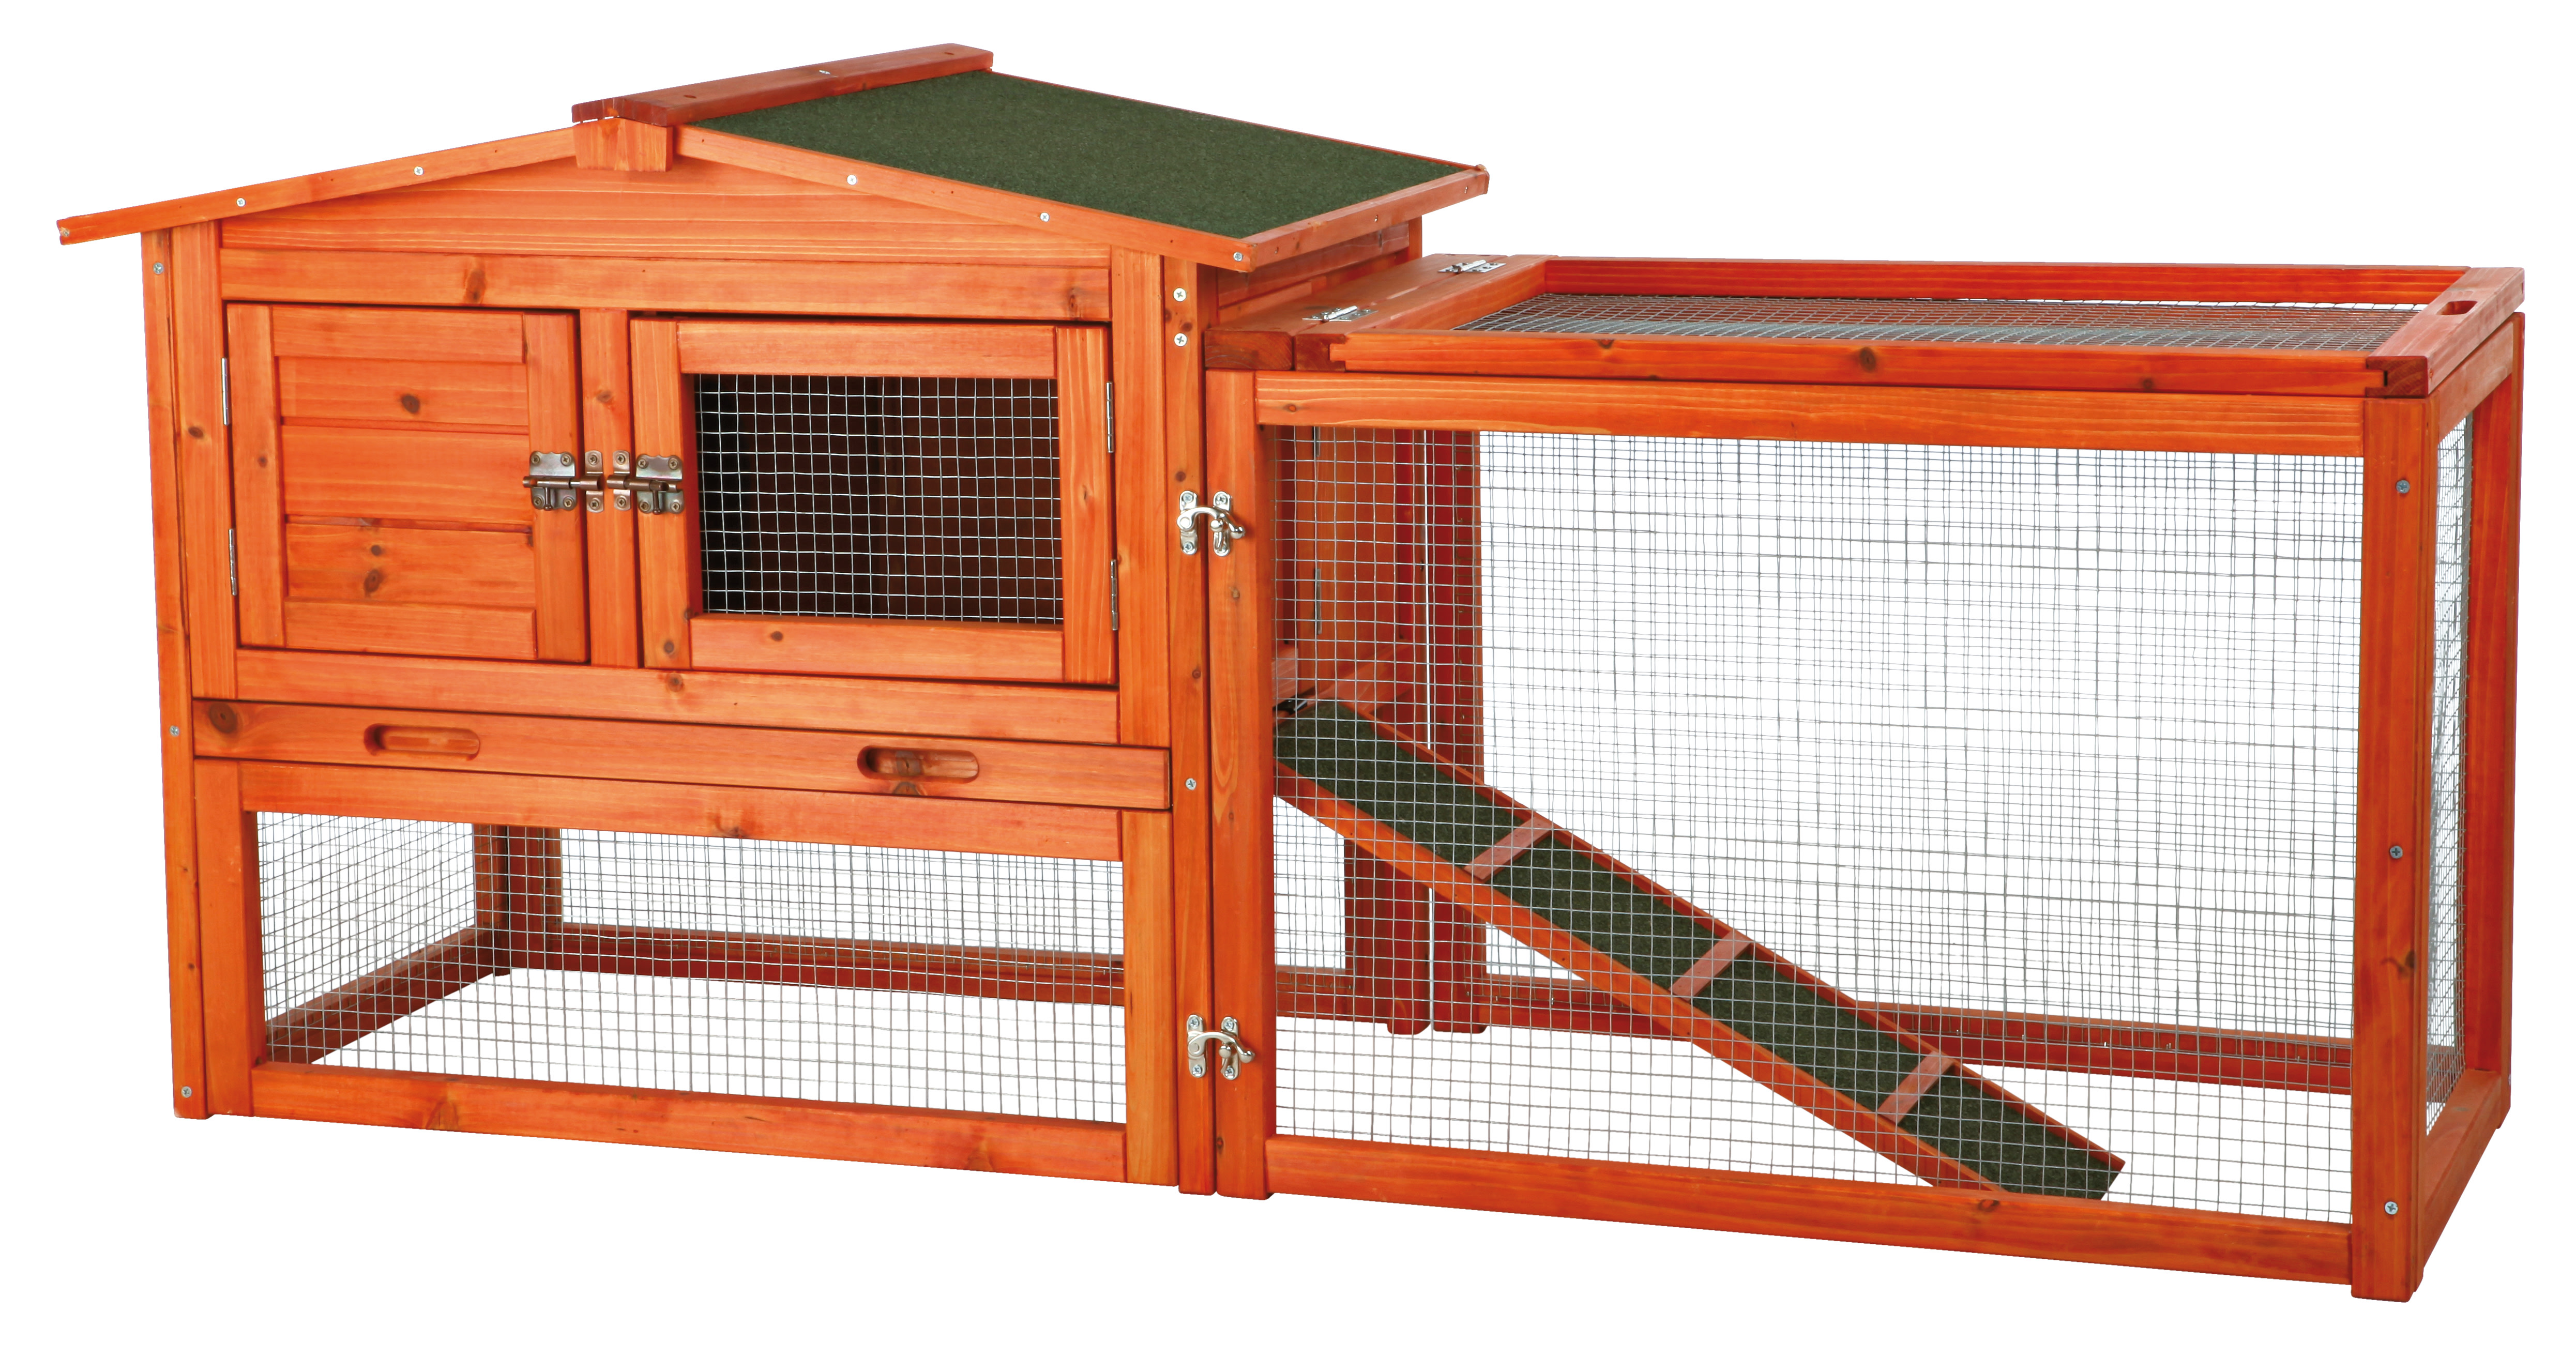 TRIXIE Weatherproof Outdoor 2-Story Wooden Small Animal Hutch, Run & Pull-Out Tray, Brown - image 1 of 6